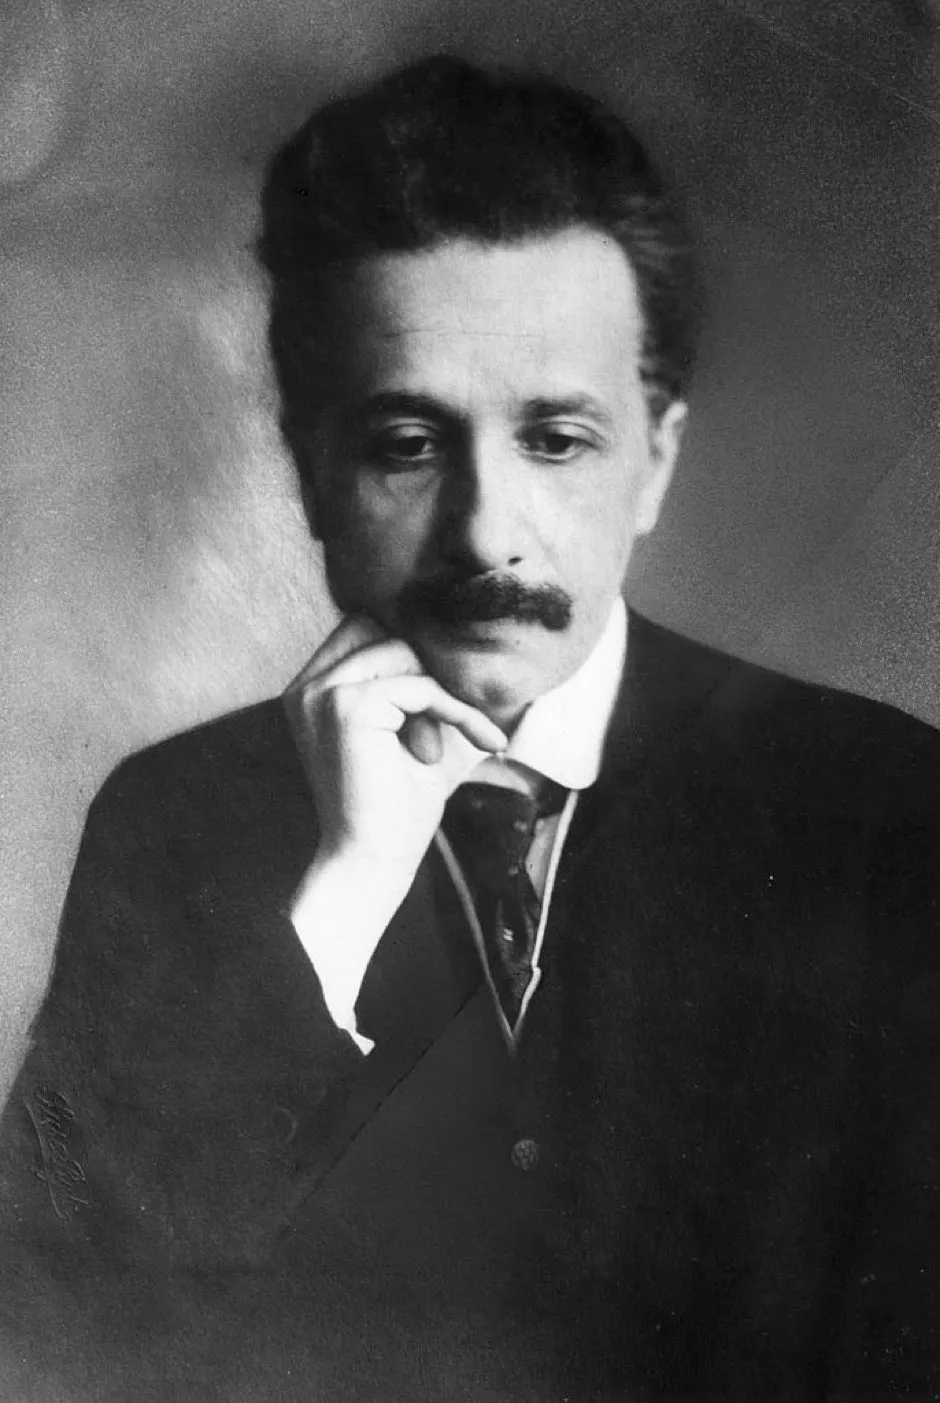 Albert Einstein (1879 - 1955), the German-Swiss-American mathematical atomic physicist and Nobel prizewinner, seen early in his career in a thoughtful pose. (Photo by Hulton Archive/Getty Images)